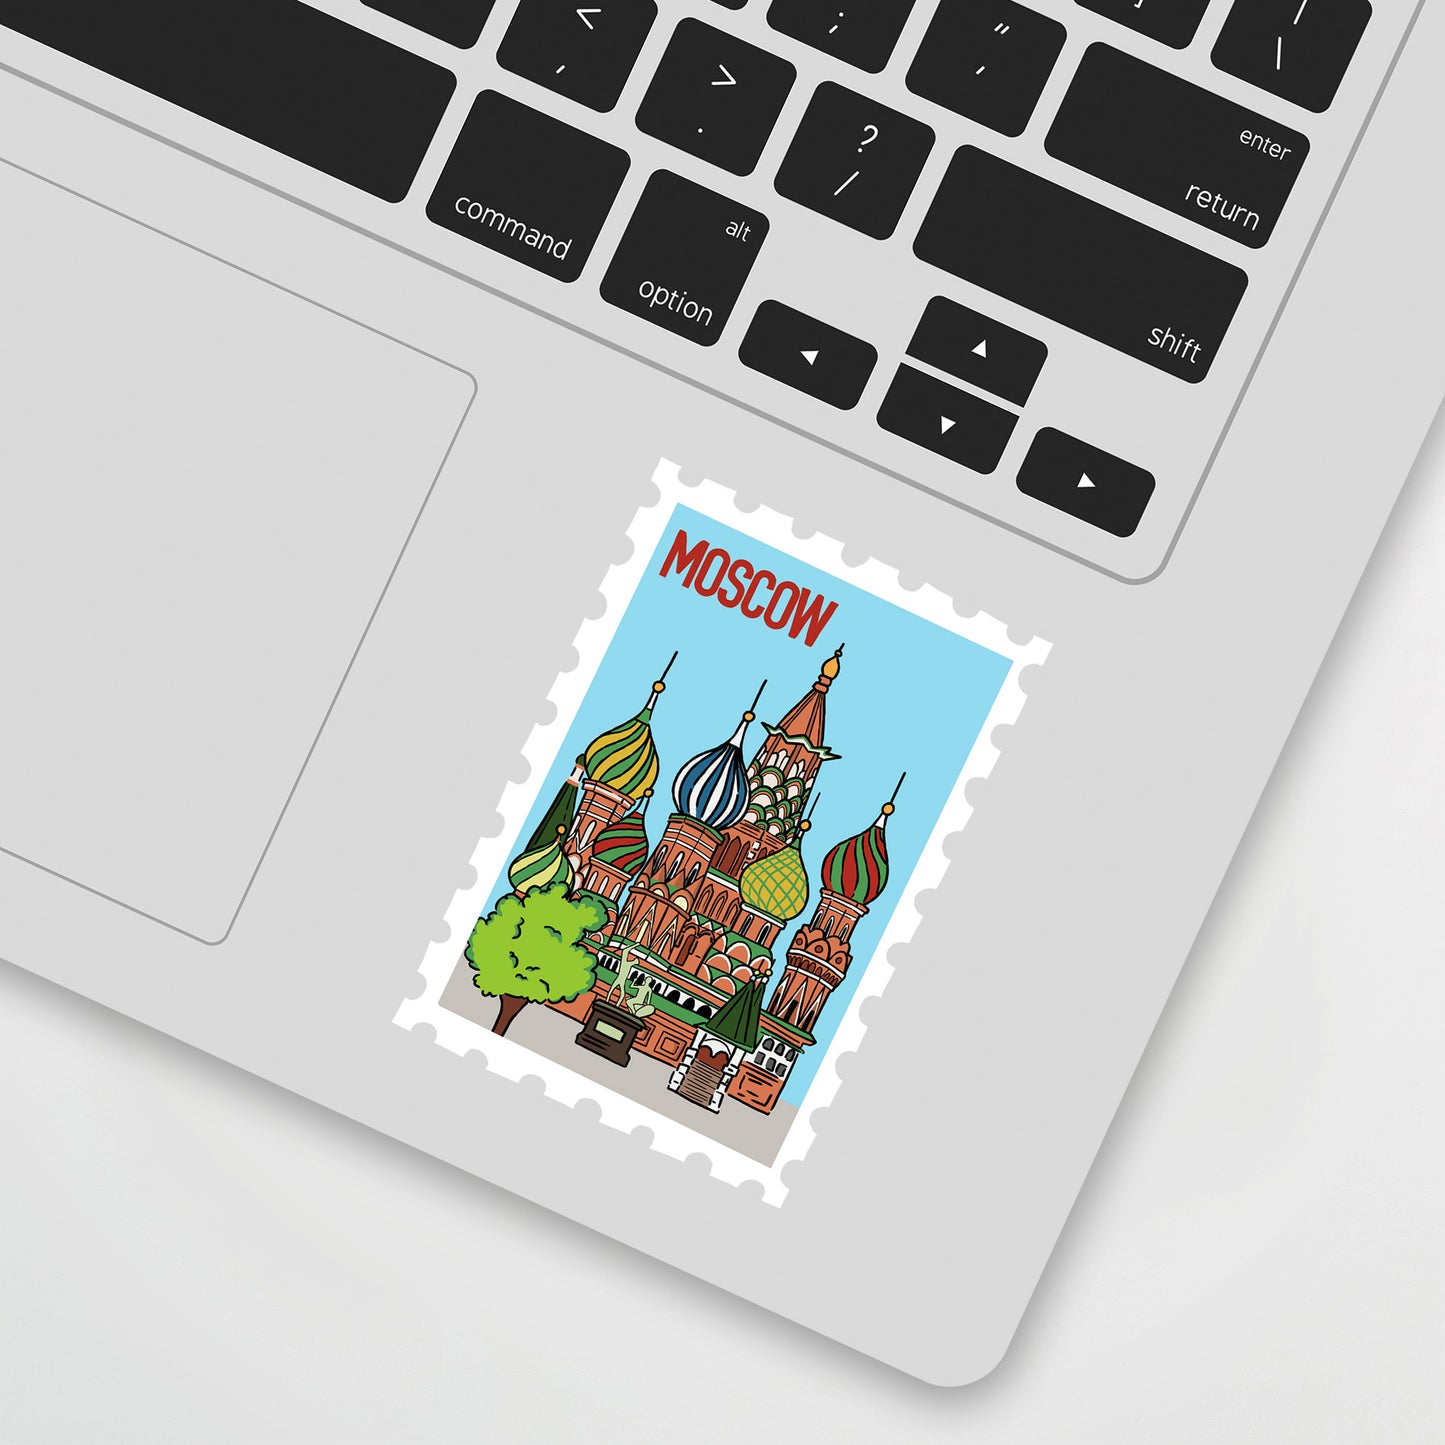 Moscow Stamp Sticker